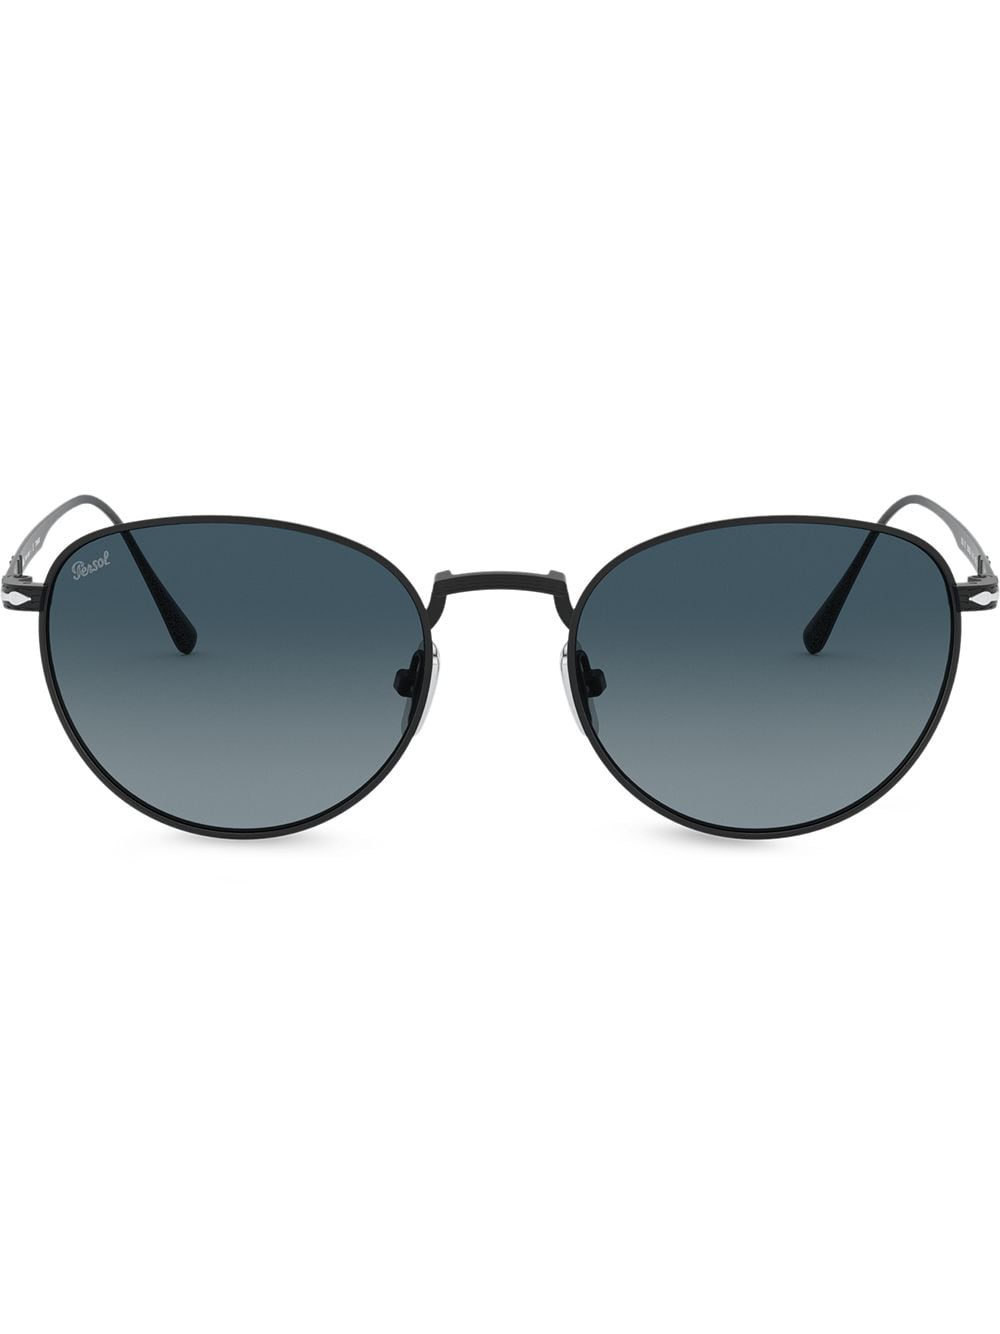 Image 1 of Persol round frame sunglasses